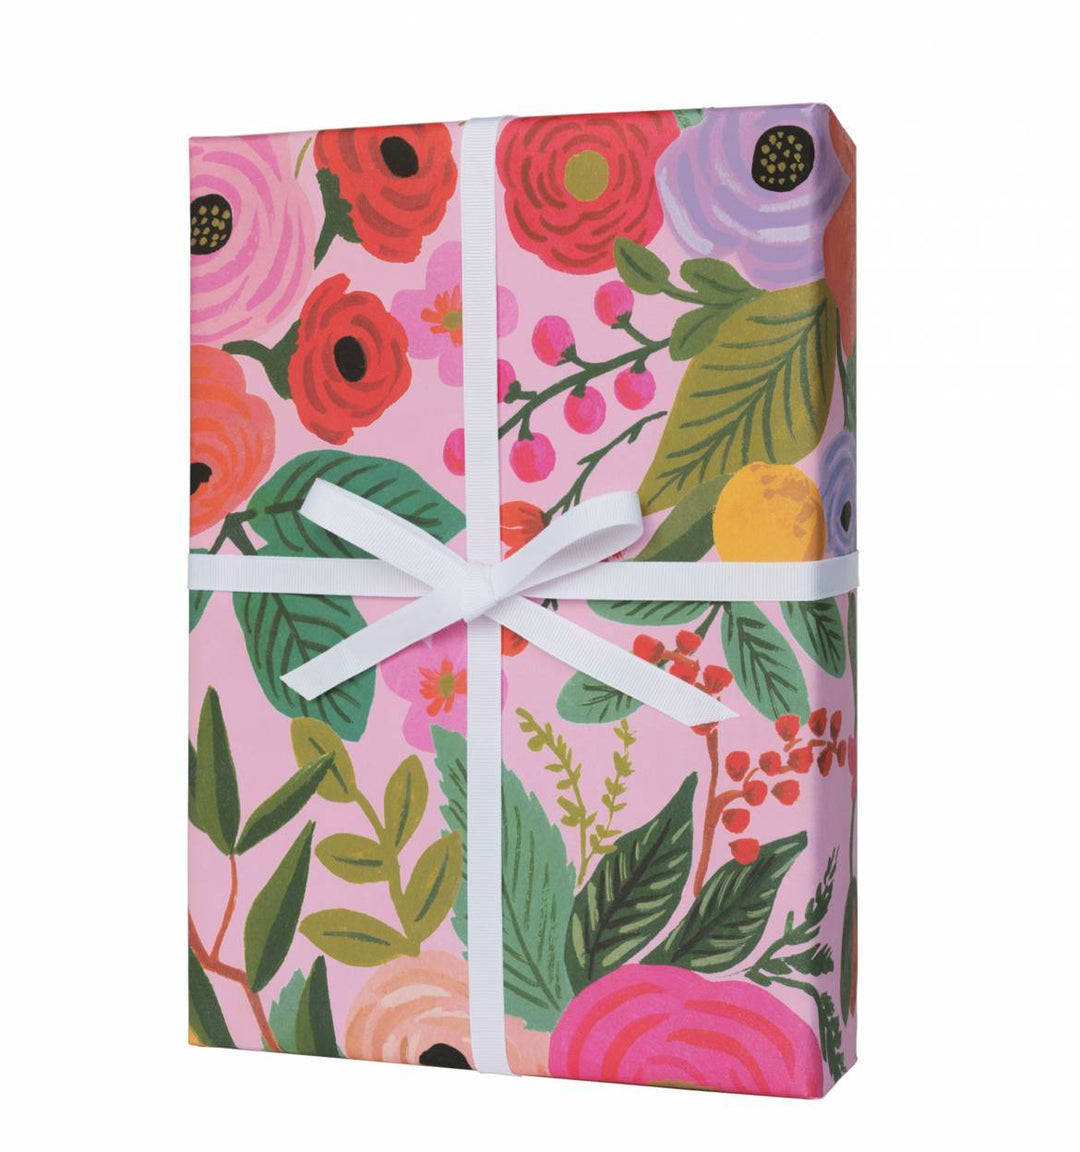 Garden Party Wrapping Sheets